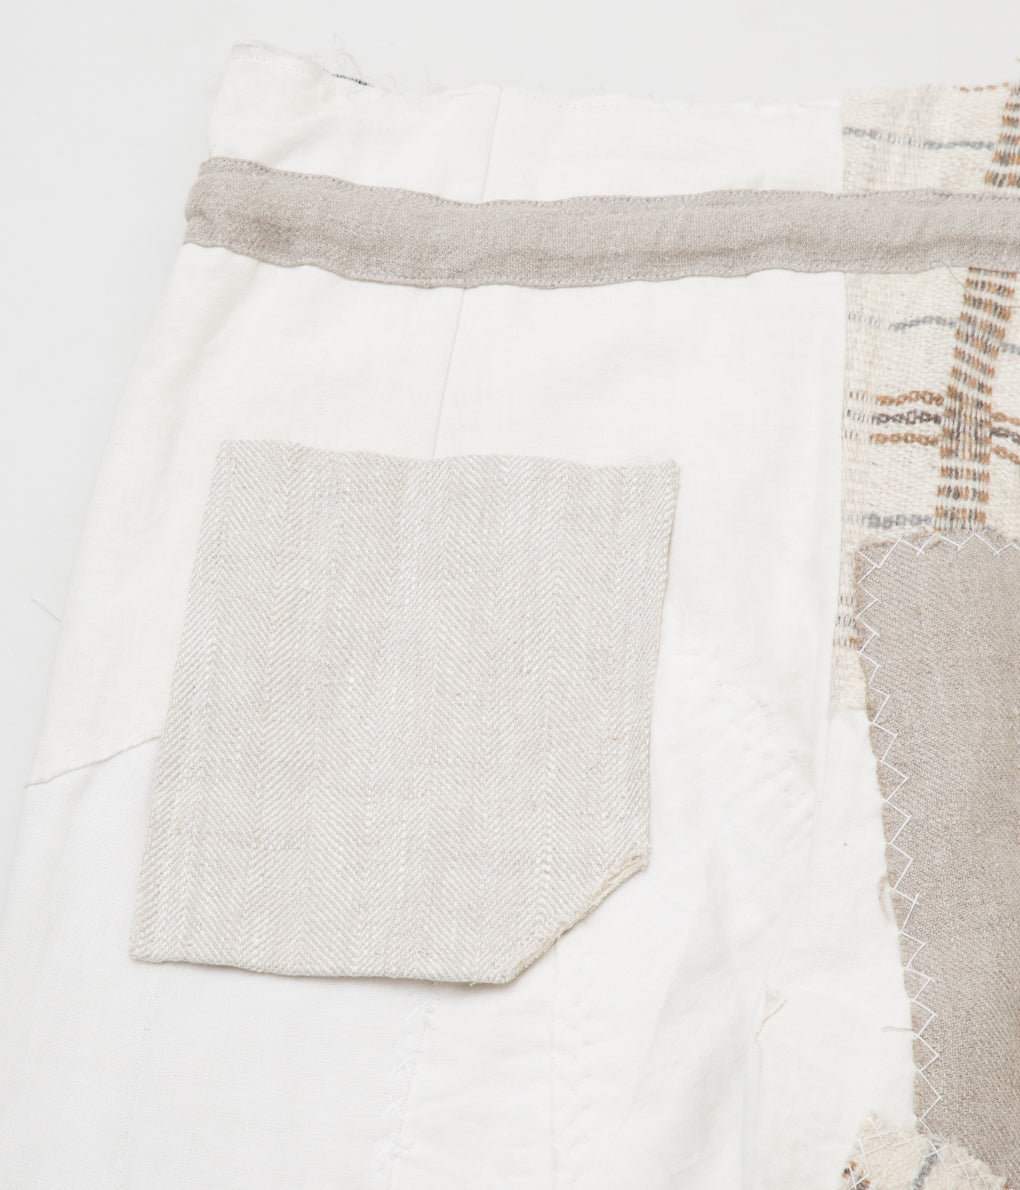 MONAD LONDON "ROBERTS HALF OVERALLS (100% LINEN/WOO/COTTON PATCHED OFF CUTS)"(VARIED/NATURAL)